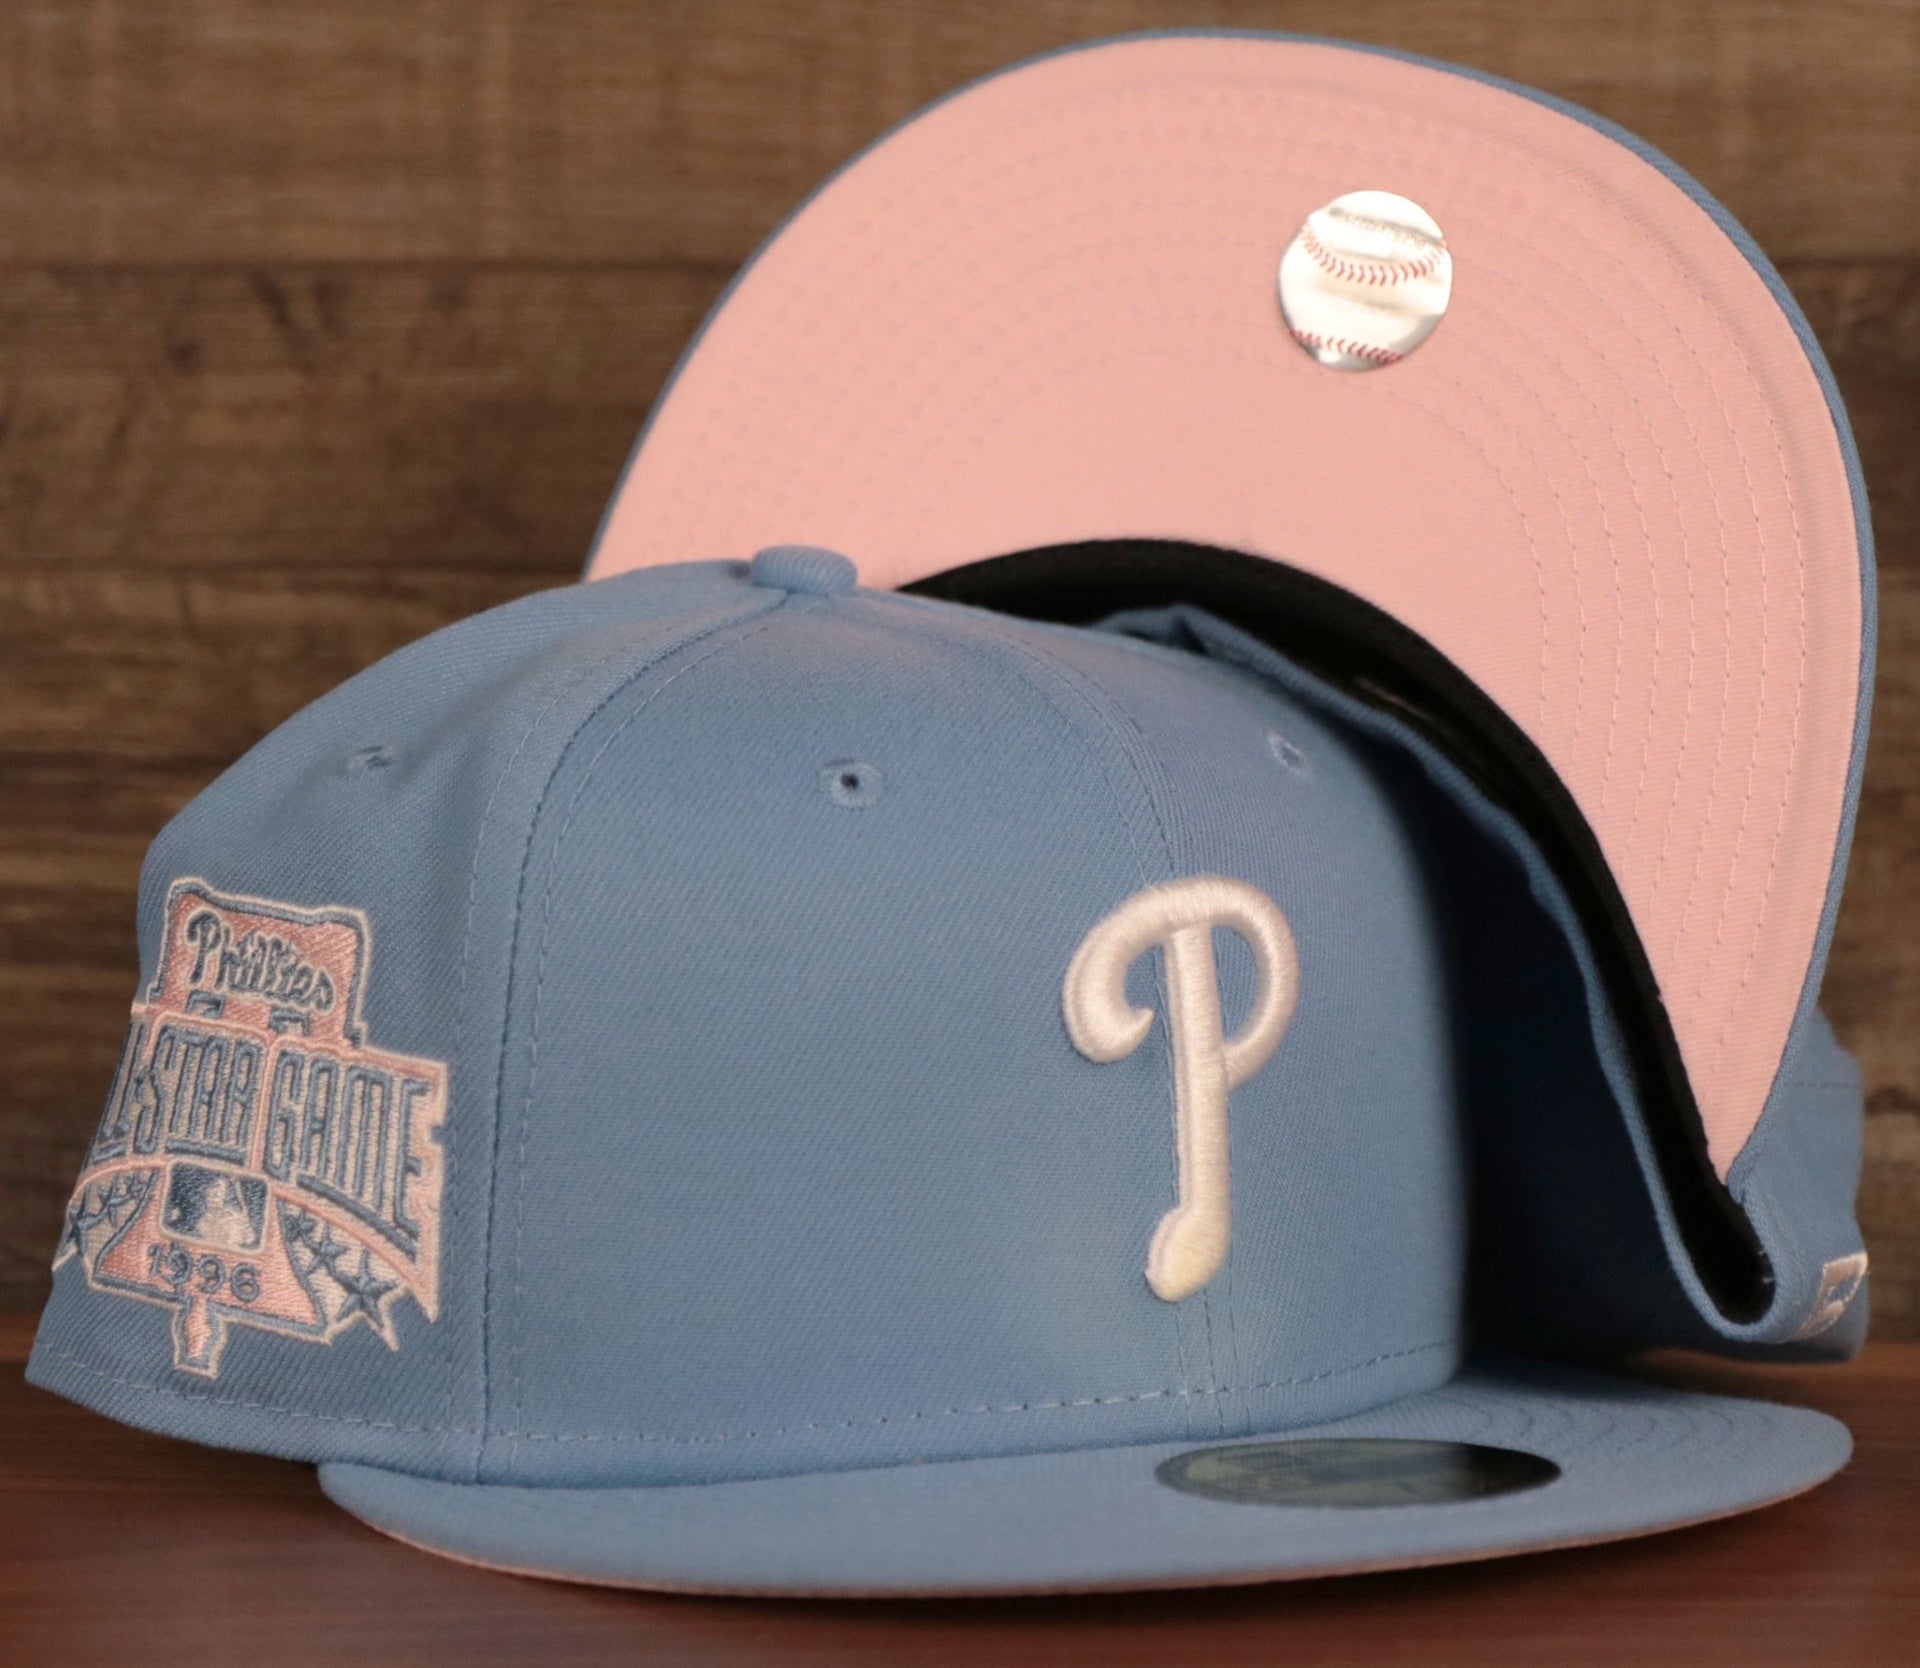 The MLB 1996 All Star Game ice blue side patch pink bottom fitted hat for the Philadelphia Phillies by New Era.